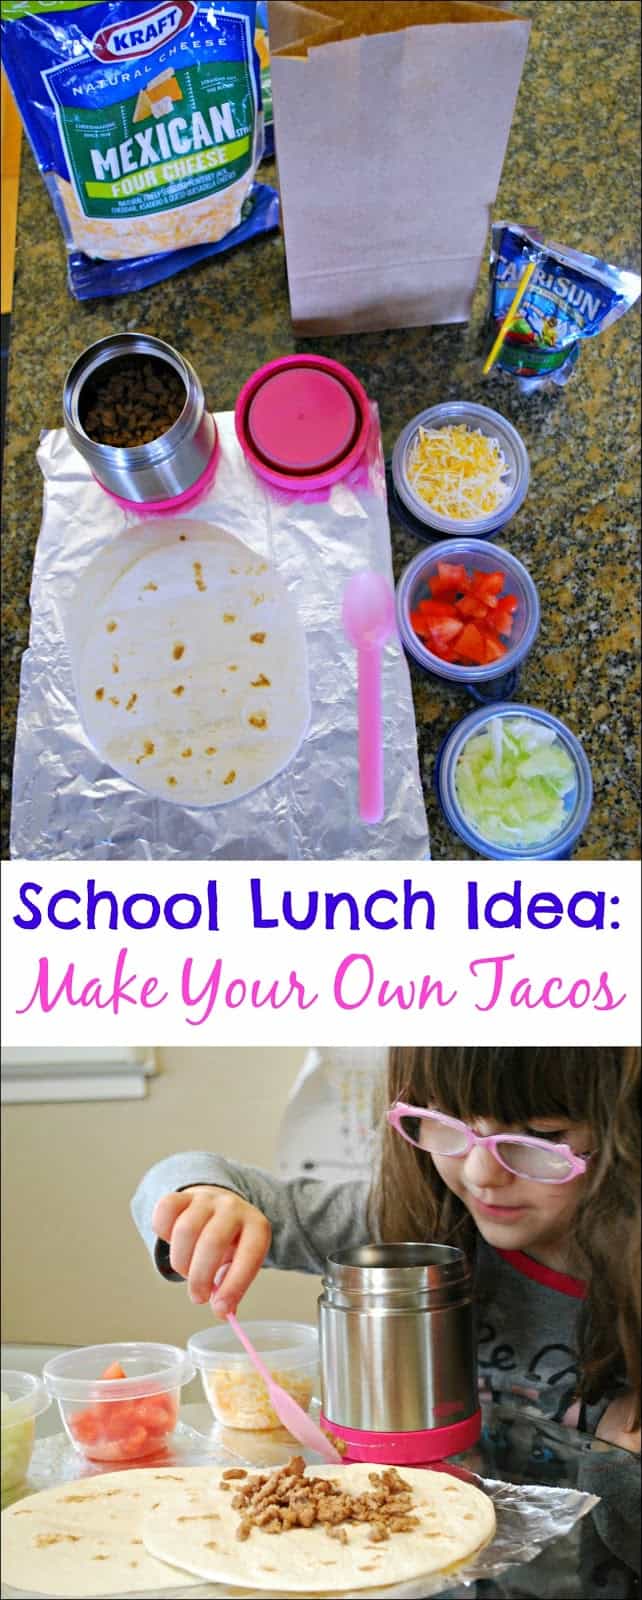 School Lunch Idea: Make Your Own Tacos - Are your kids tired of the same old school lunches? Let them build their own tacos. #ChooseSmart #shop #cbias